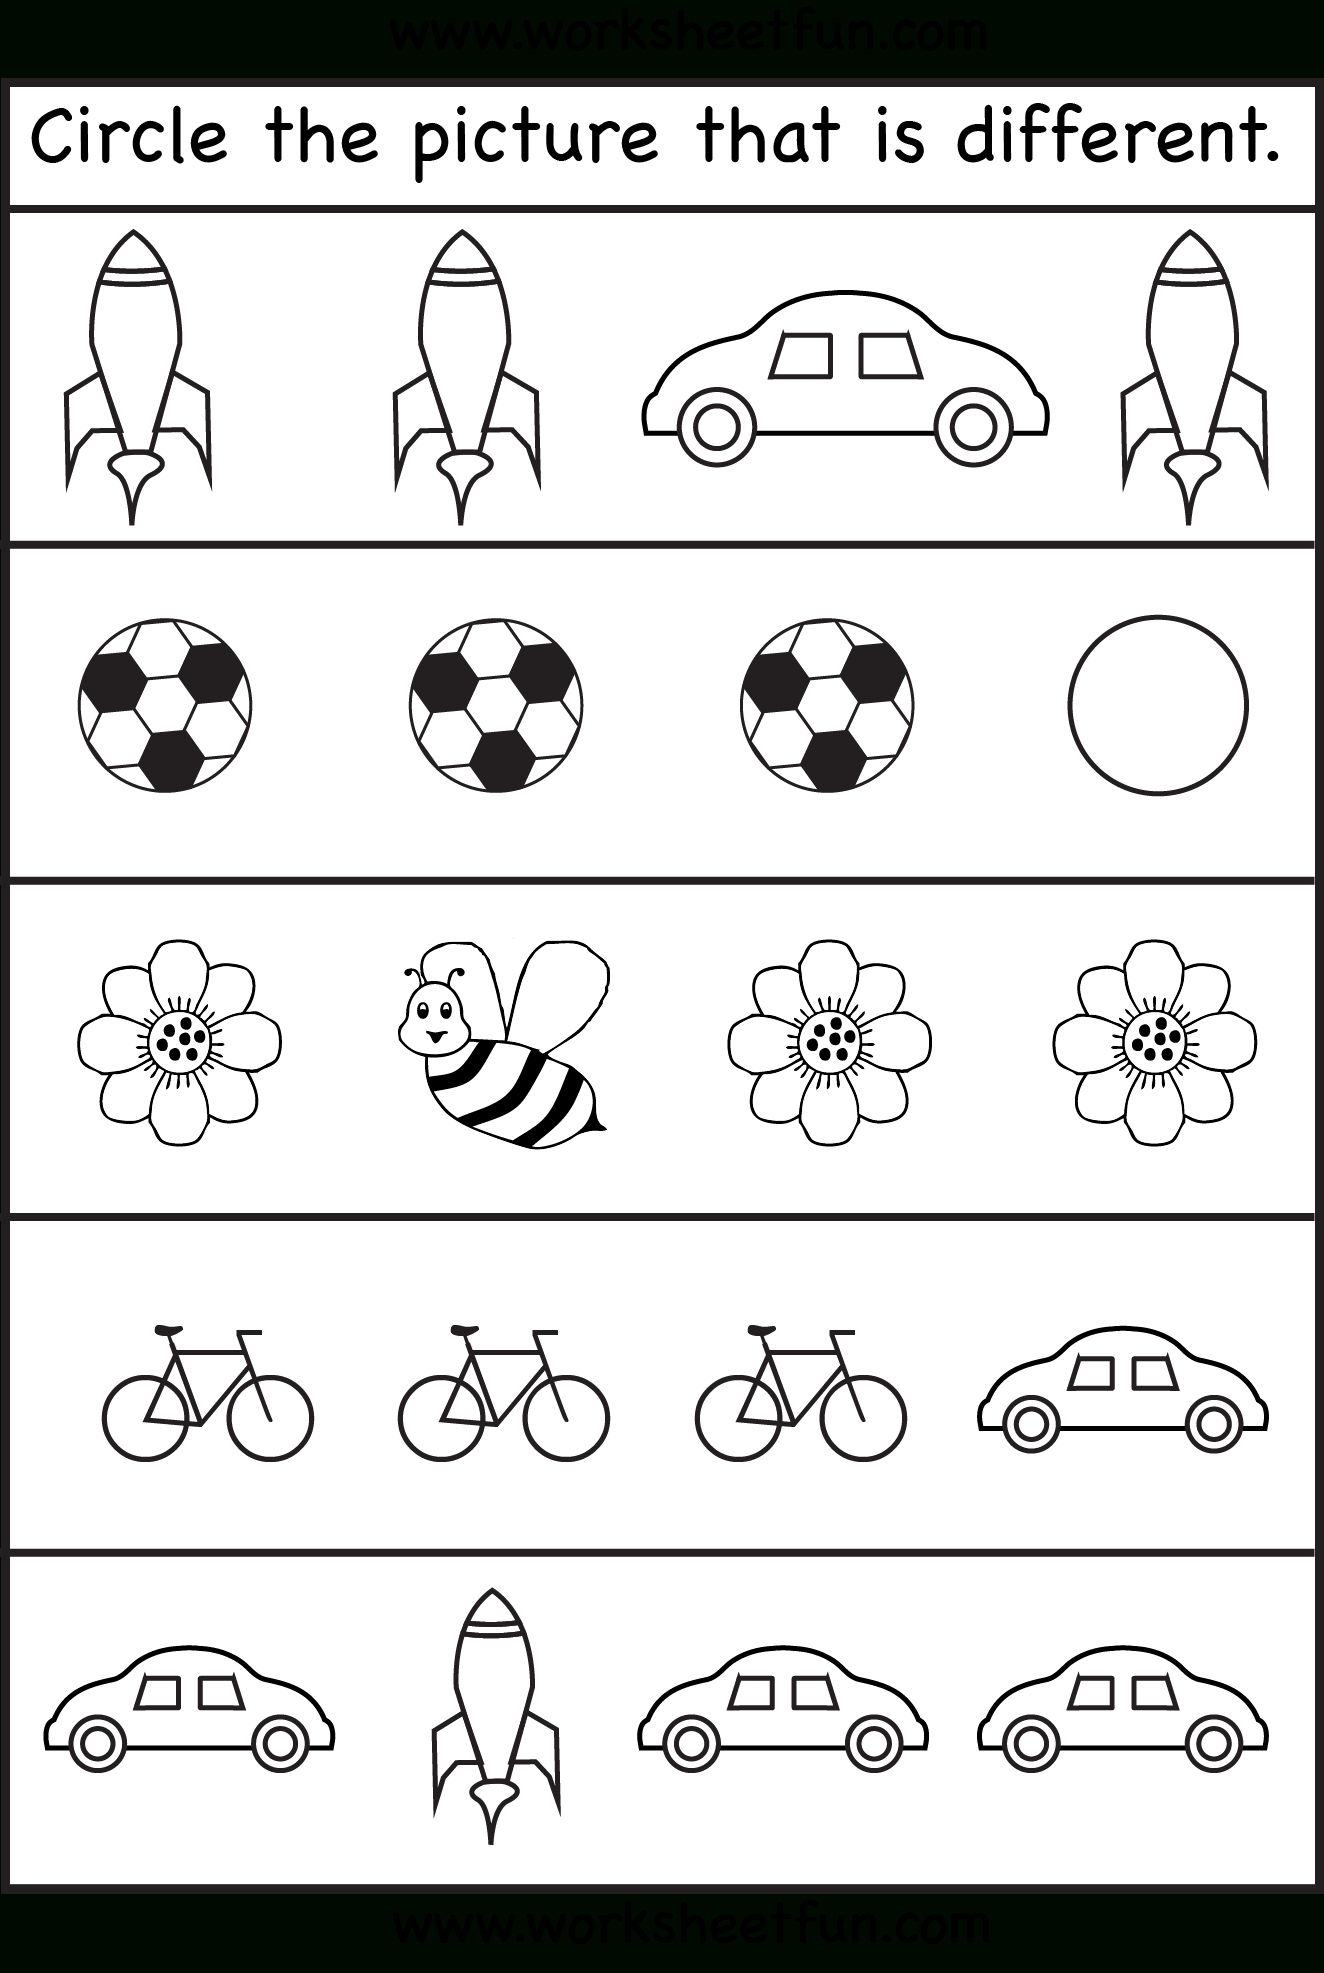 Circle The Picture That Is Different - 4 Worksheets | Preschool Work - Free Printable Activity Sheets For Kids